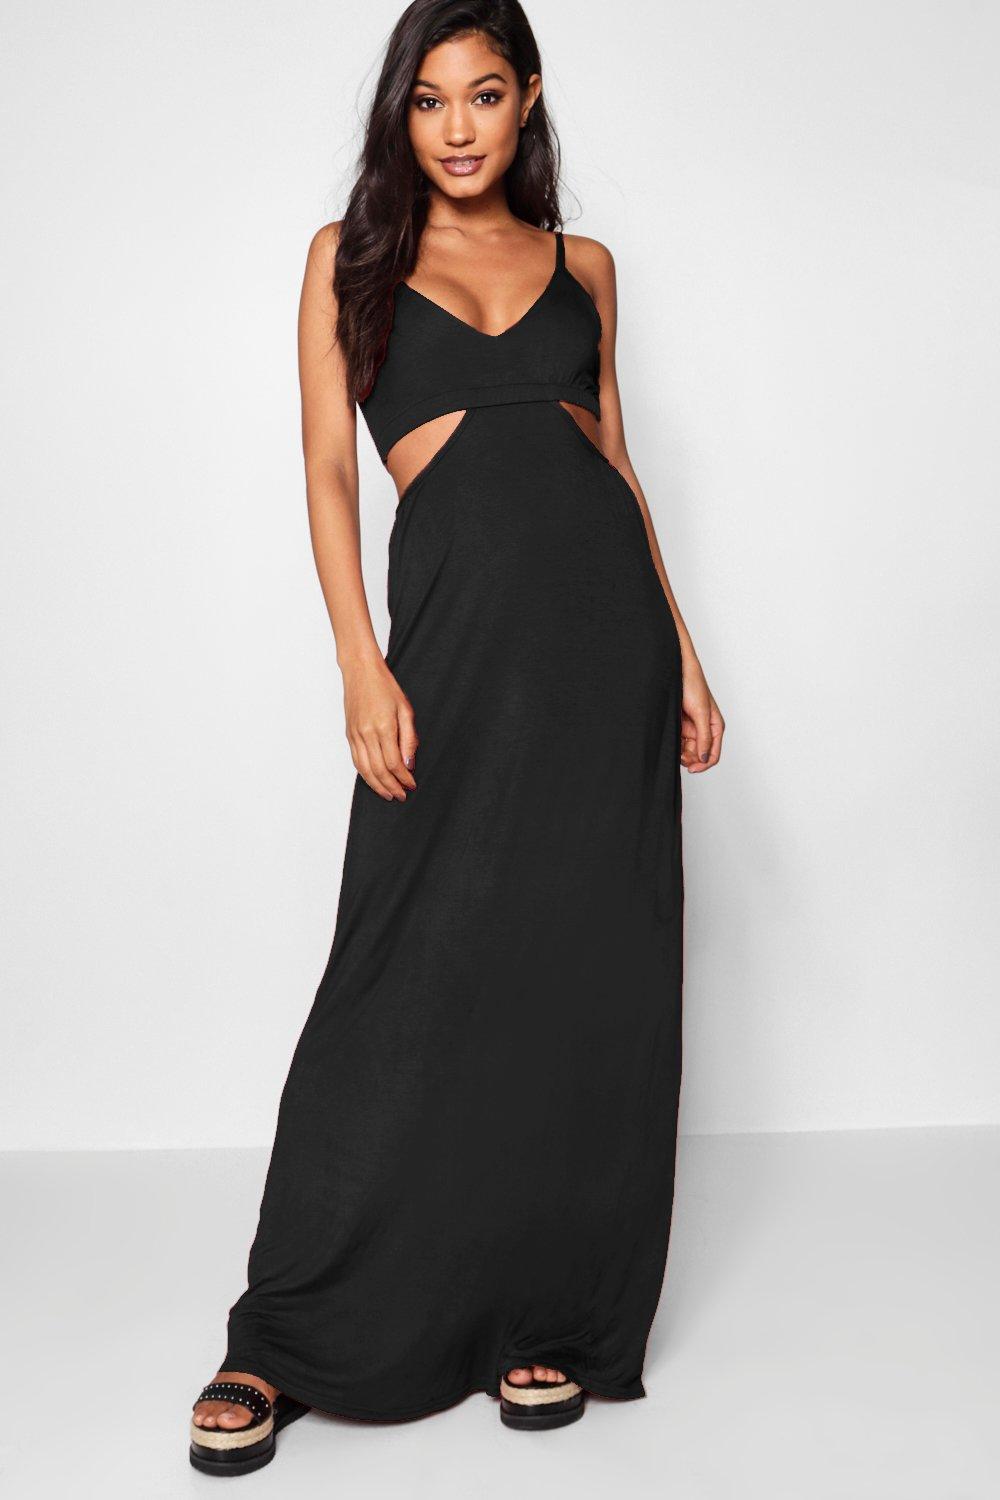 Boohoo Womens Milly Cut Out Strappy Maxi Dress | eBay